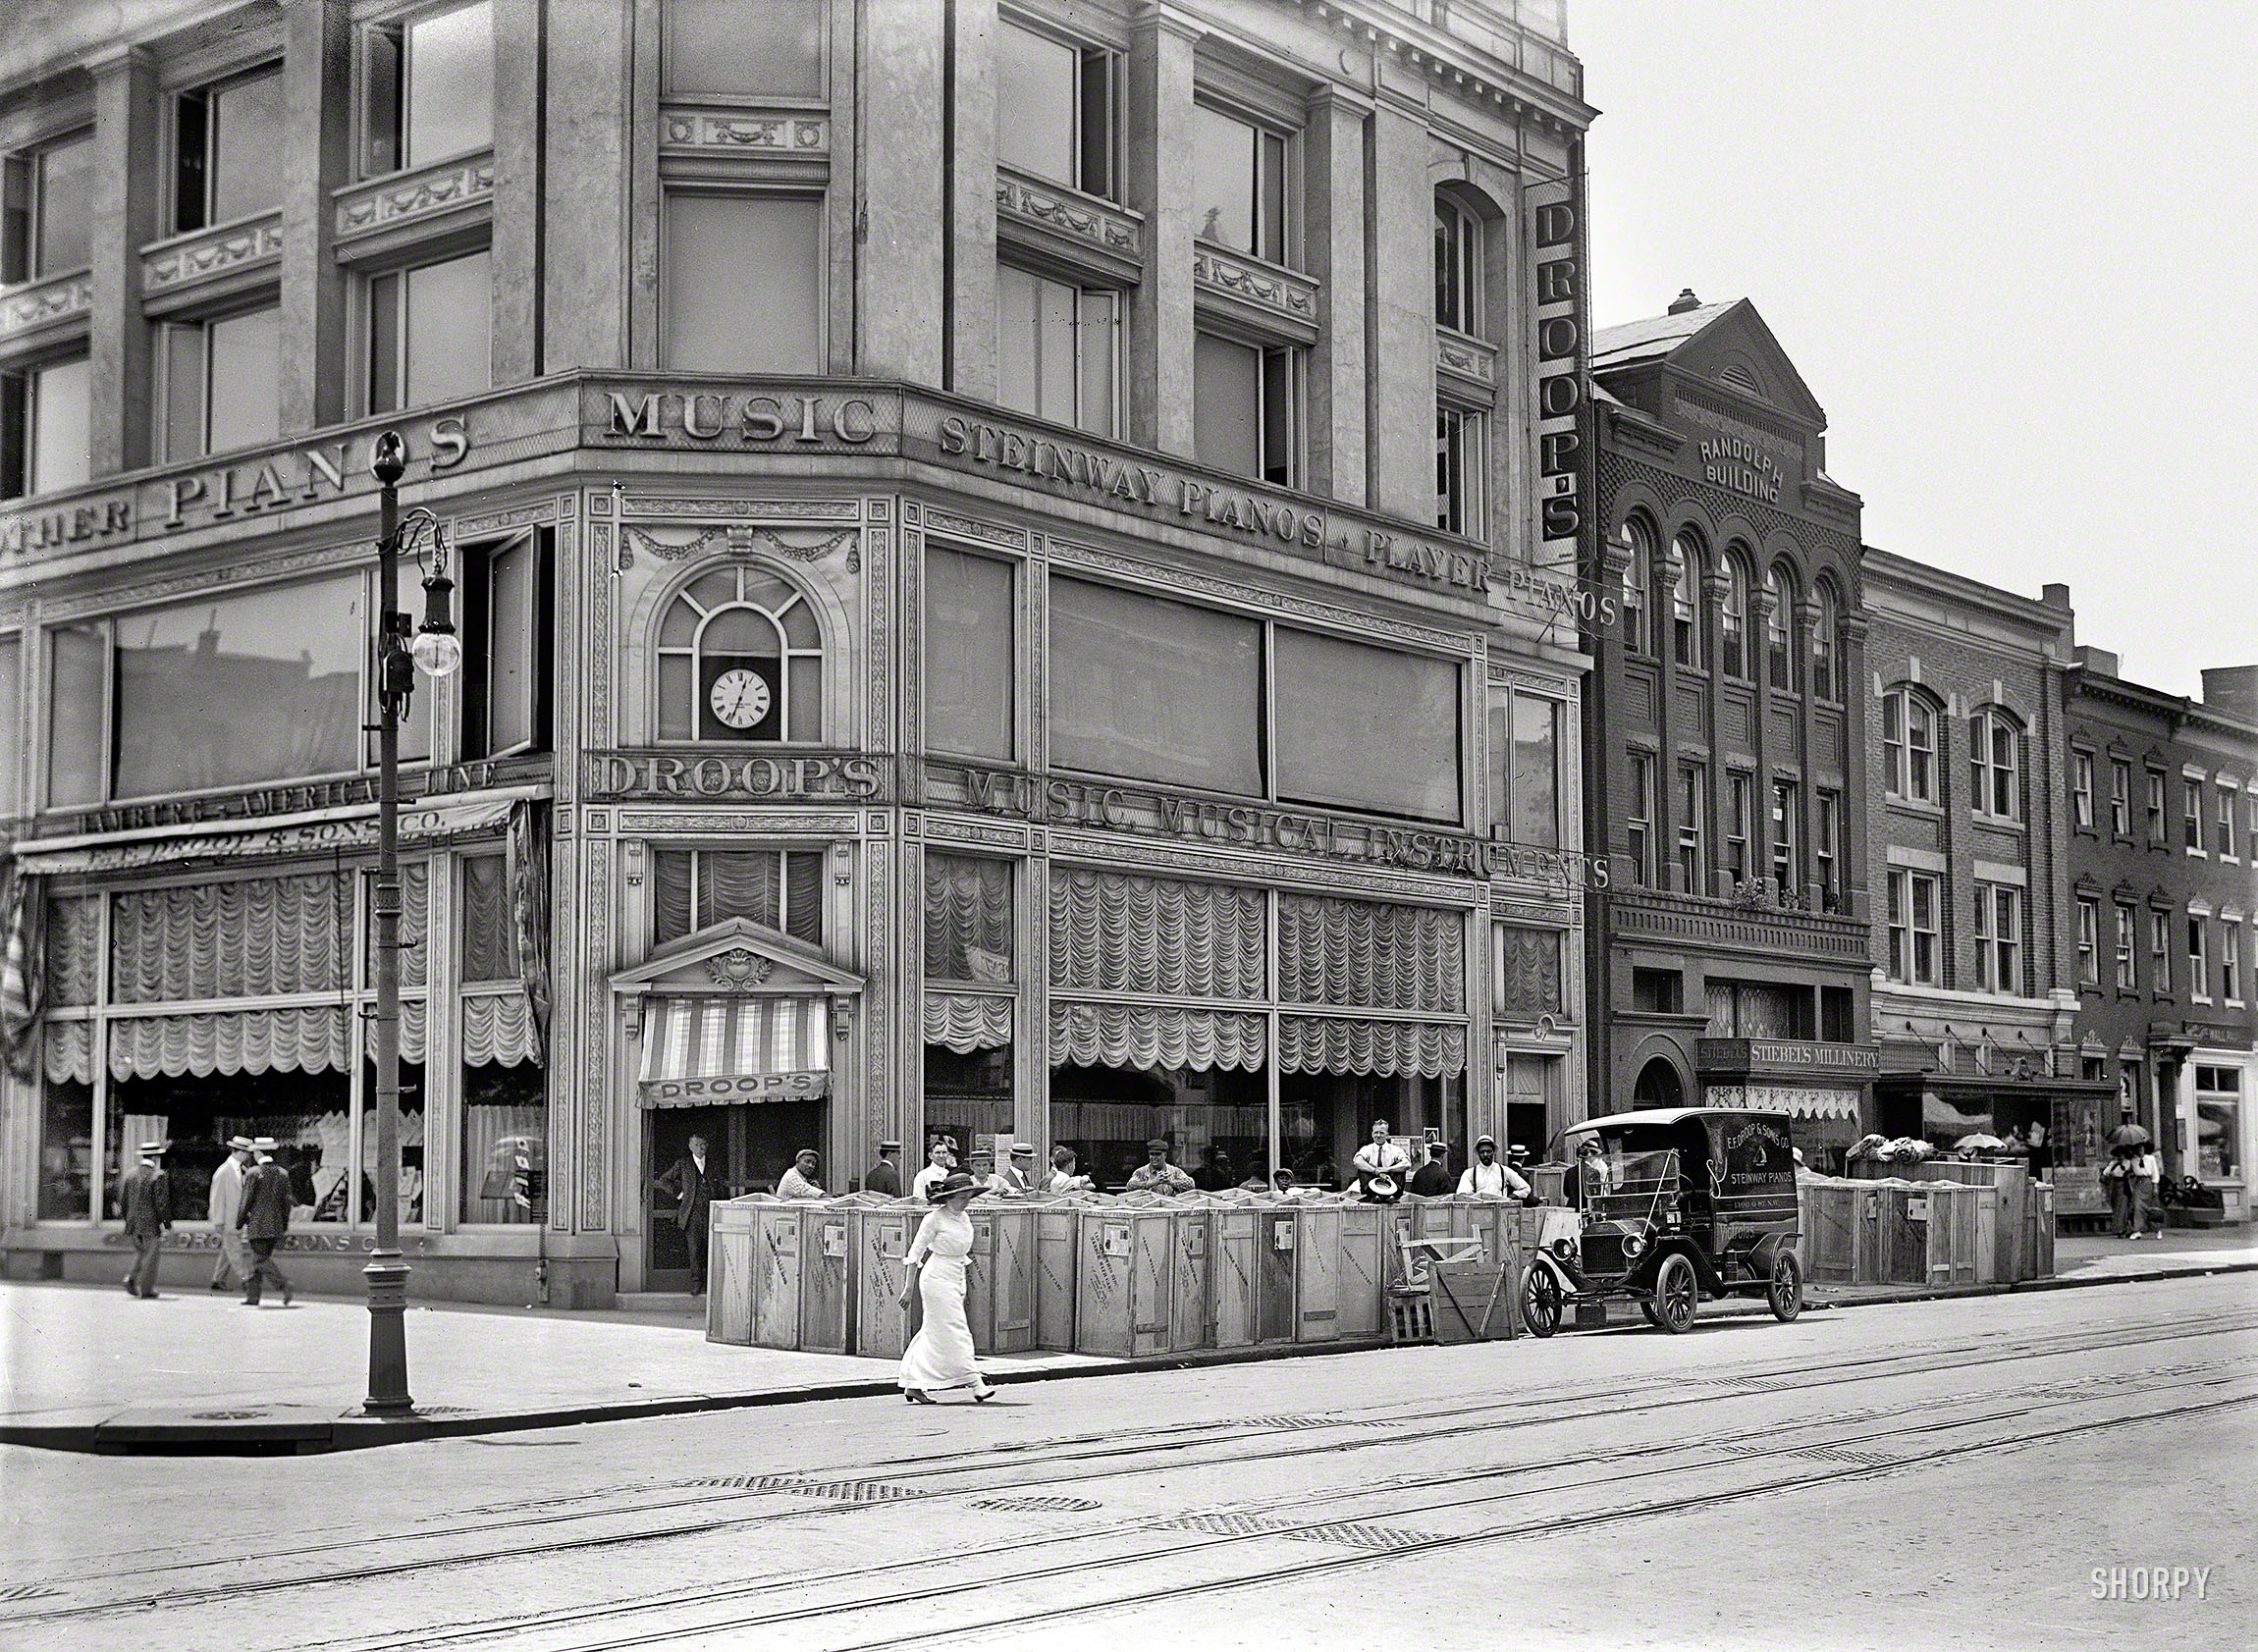 Washington, D.C., 1913. "E.F. Droop & Sons Co. music store." Back when the Victrola was the iPod of its day. Harris & Ewing glass negative. View full size.